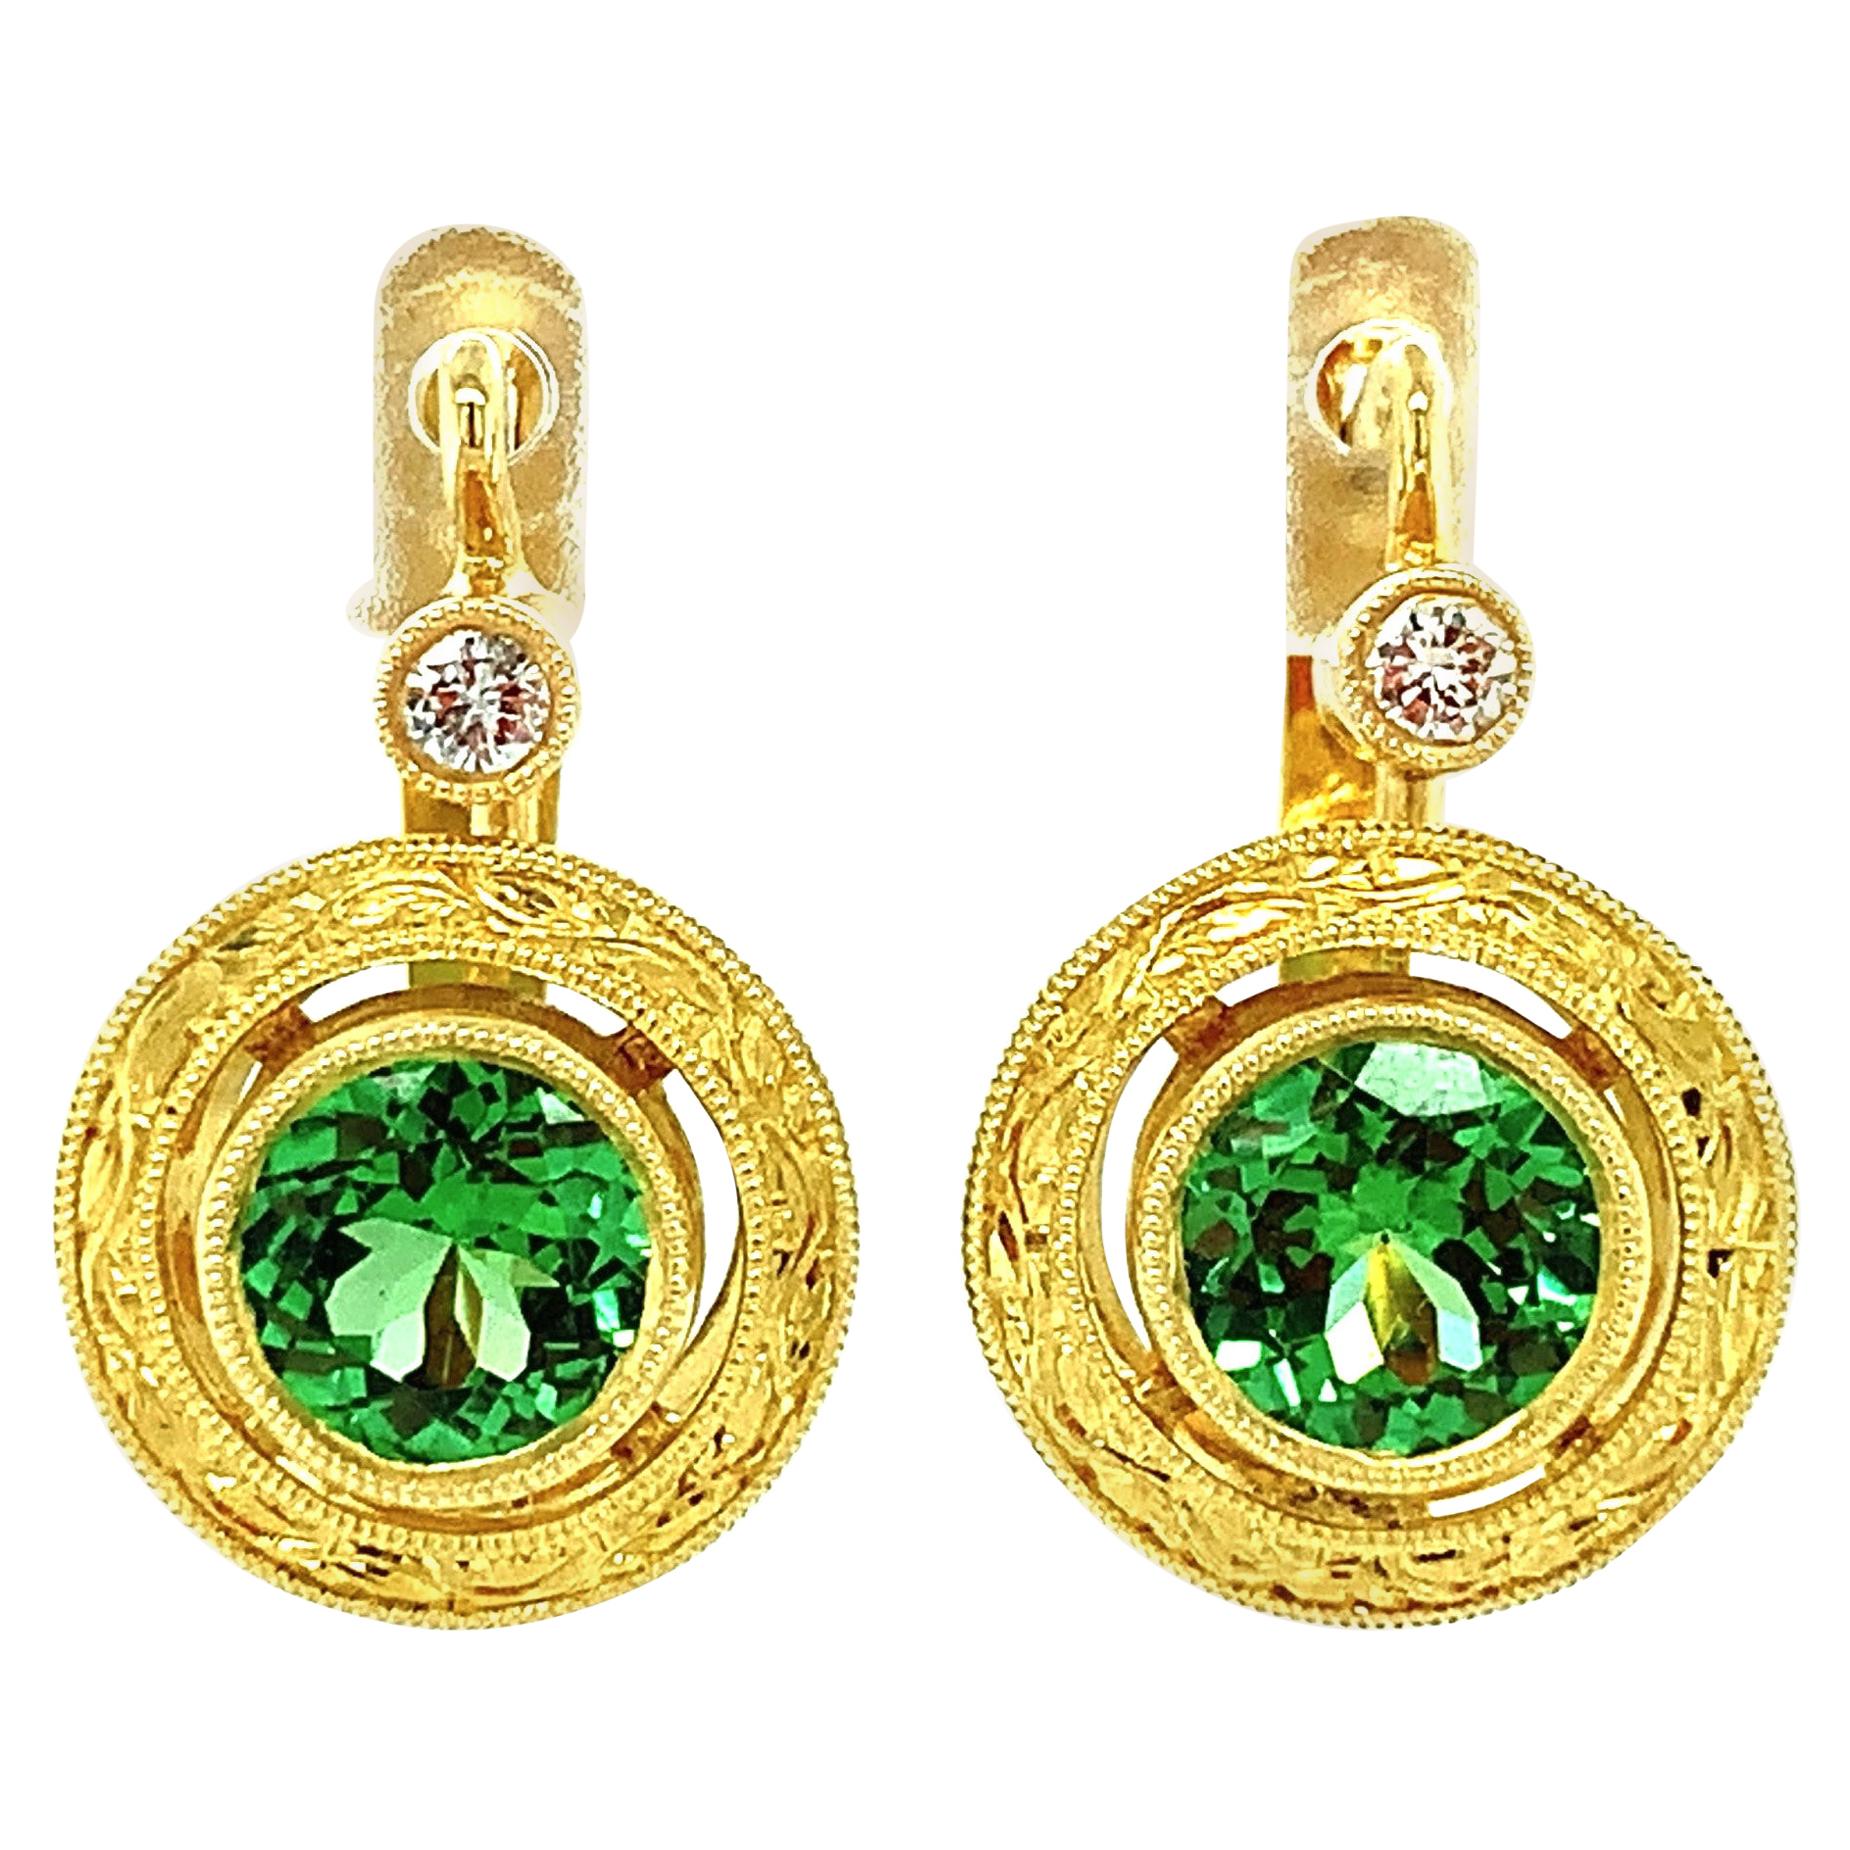 Green Tourmaline and Diamond Drop Earrings in Hand Engraved Yellow Gold Bezels